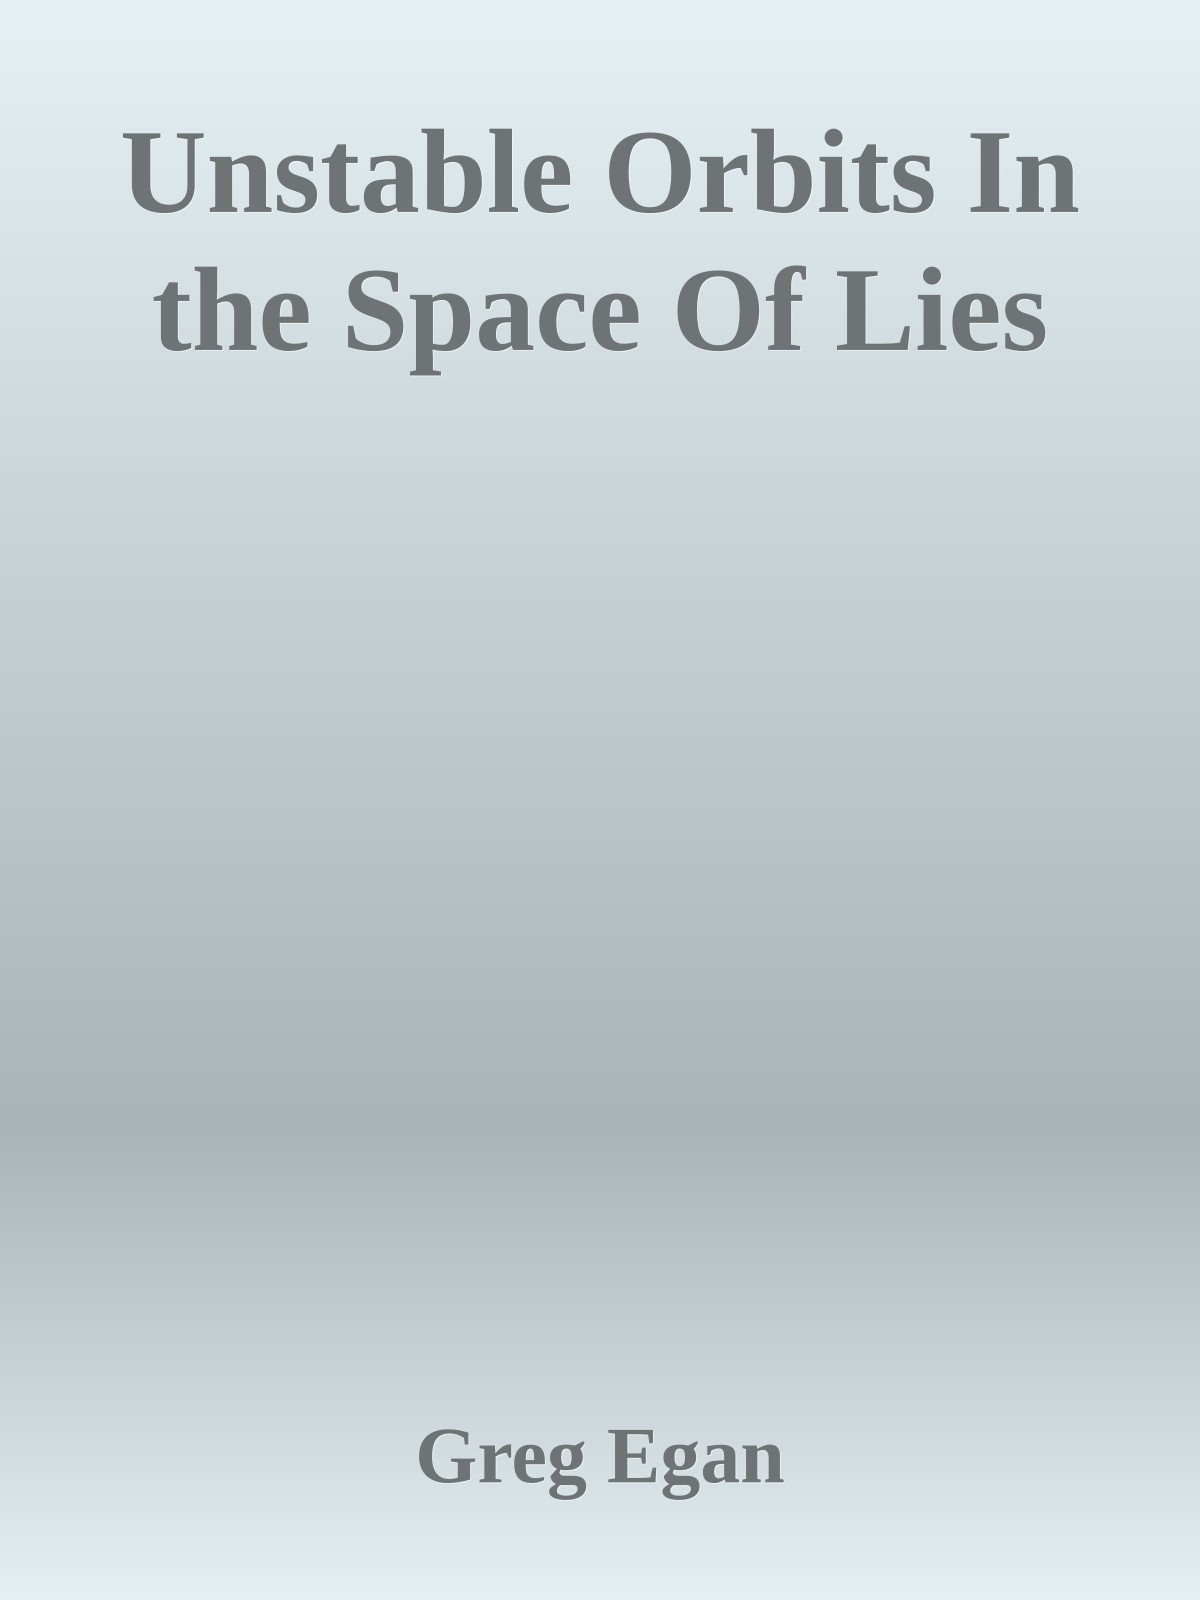 Unstable Orbits In the Space Of Lies